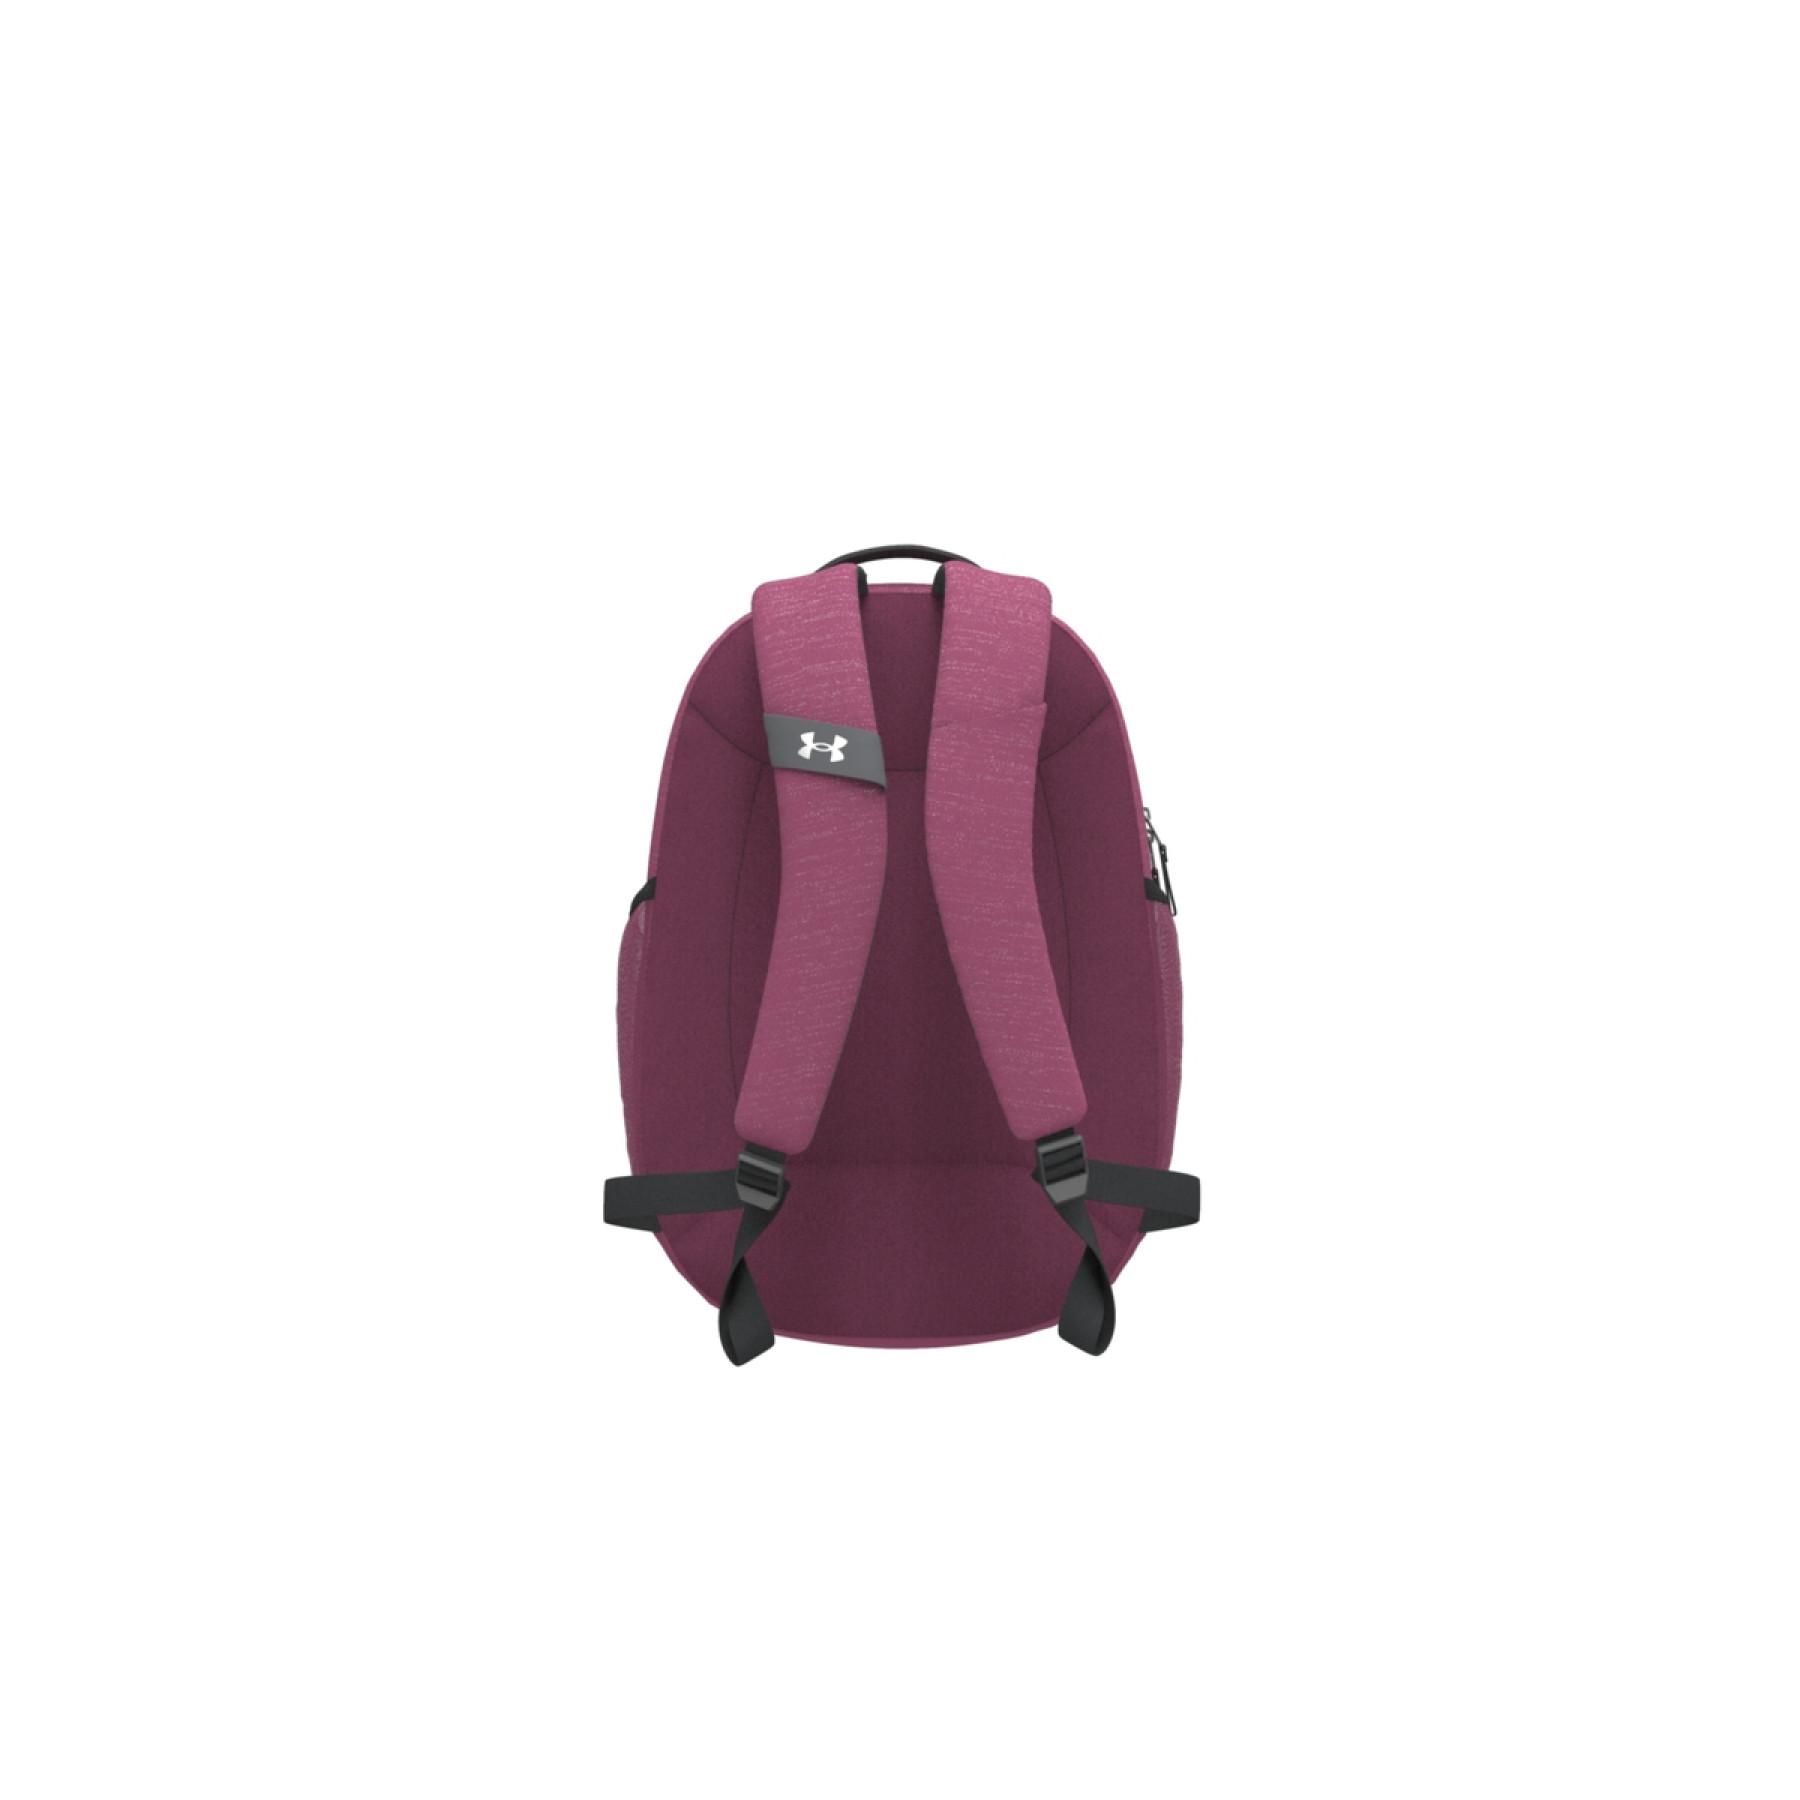 Women's backpack Under Armour Hustle Signature